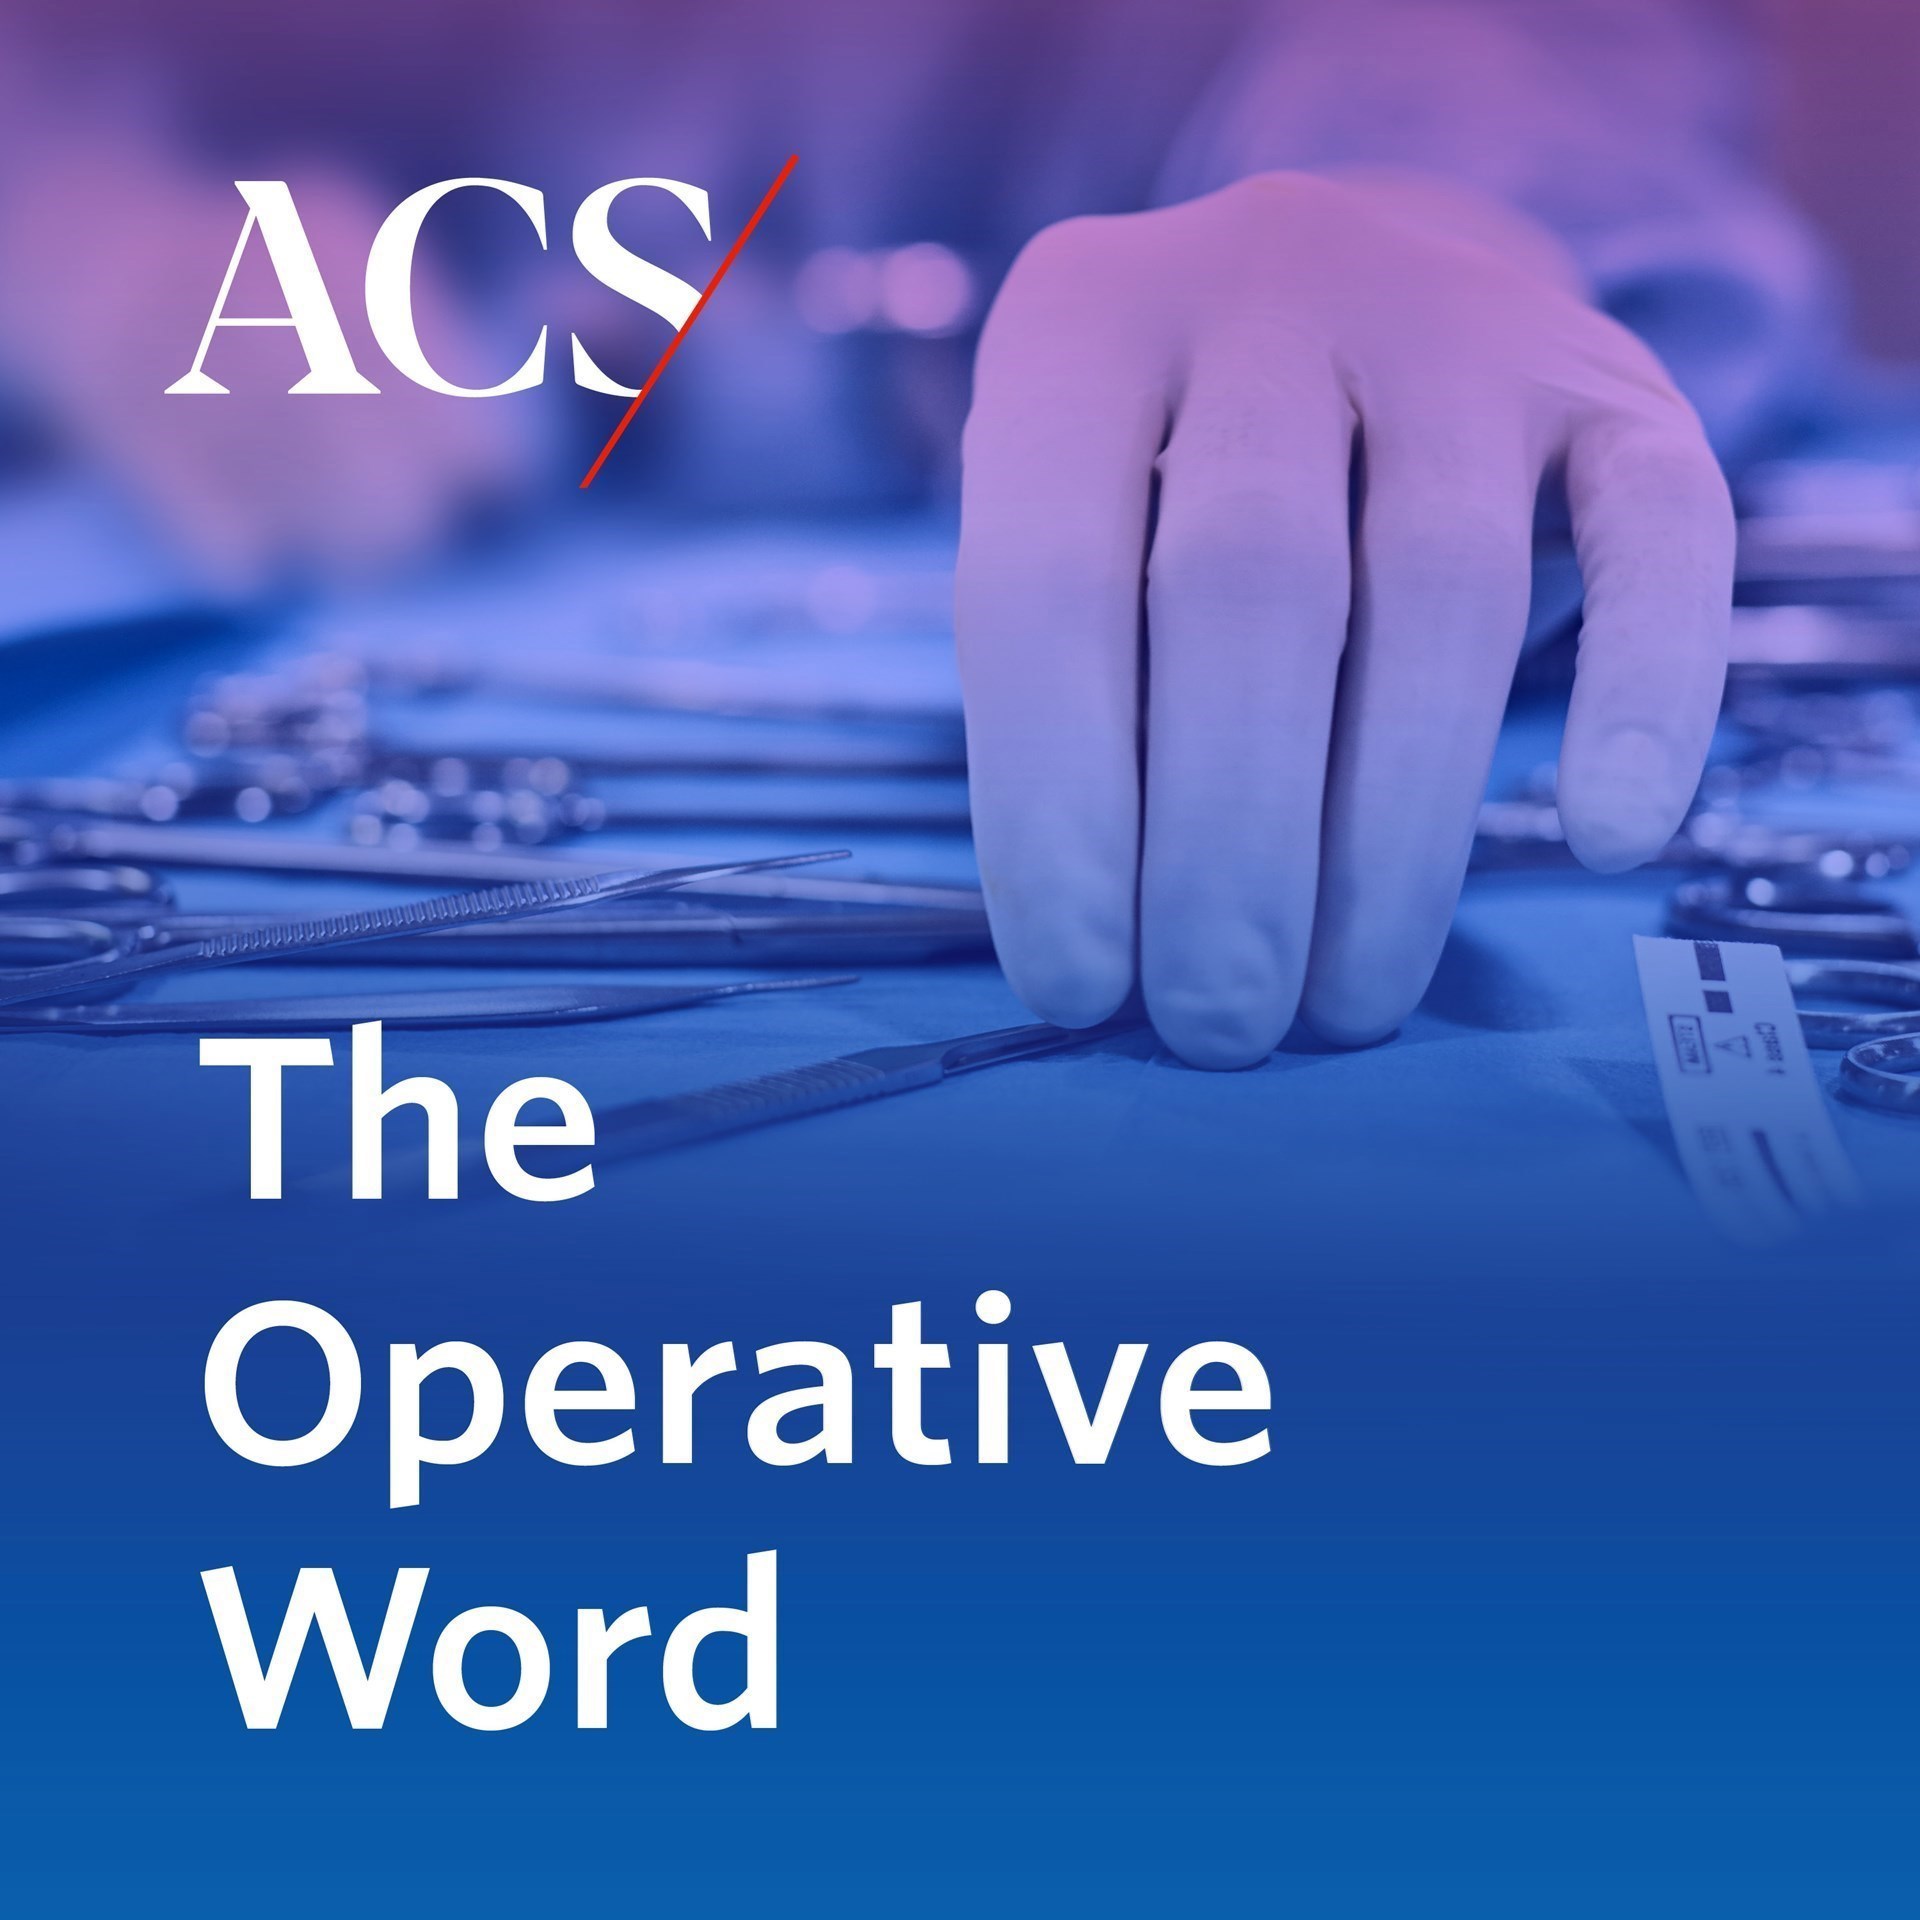 Listen to the New JACS Podcast Series, The Operative Word